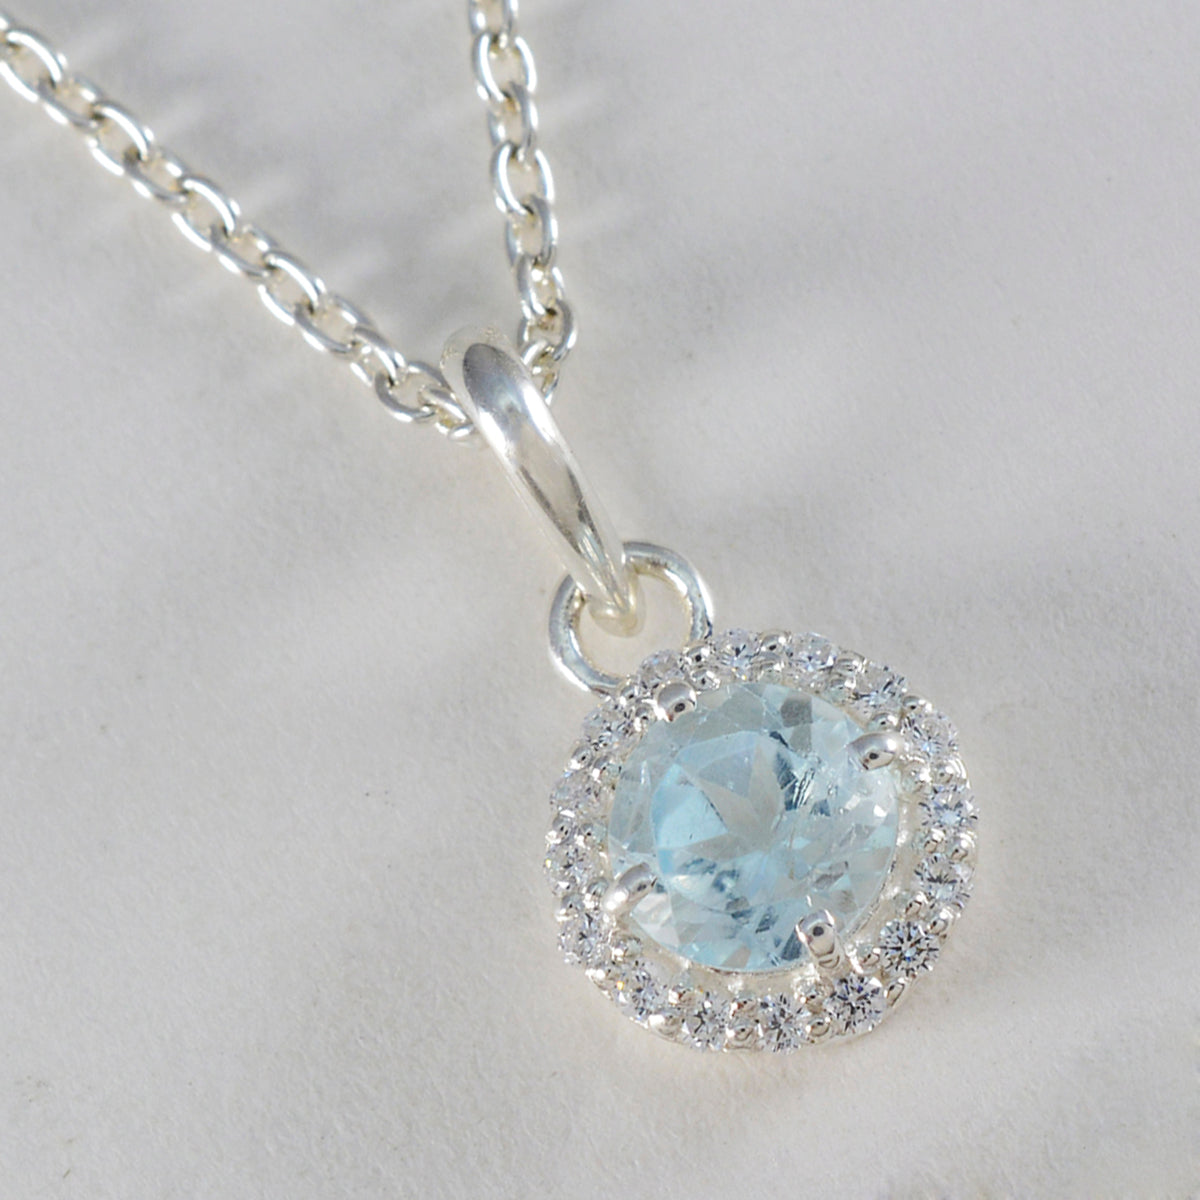 Riyo Foxy Gemstone Round Faceted Blue Blue Topaz Sterling Silver Pendant Gift For Women